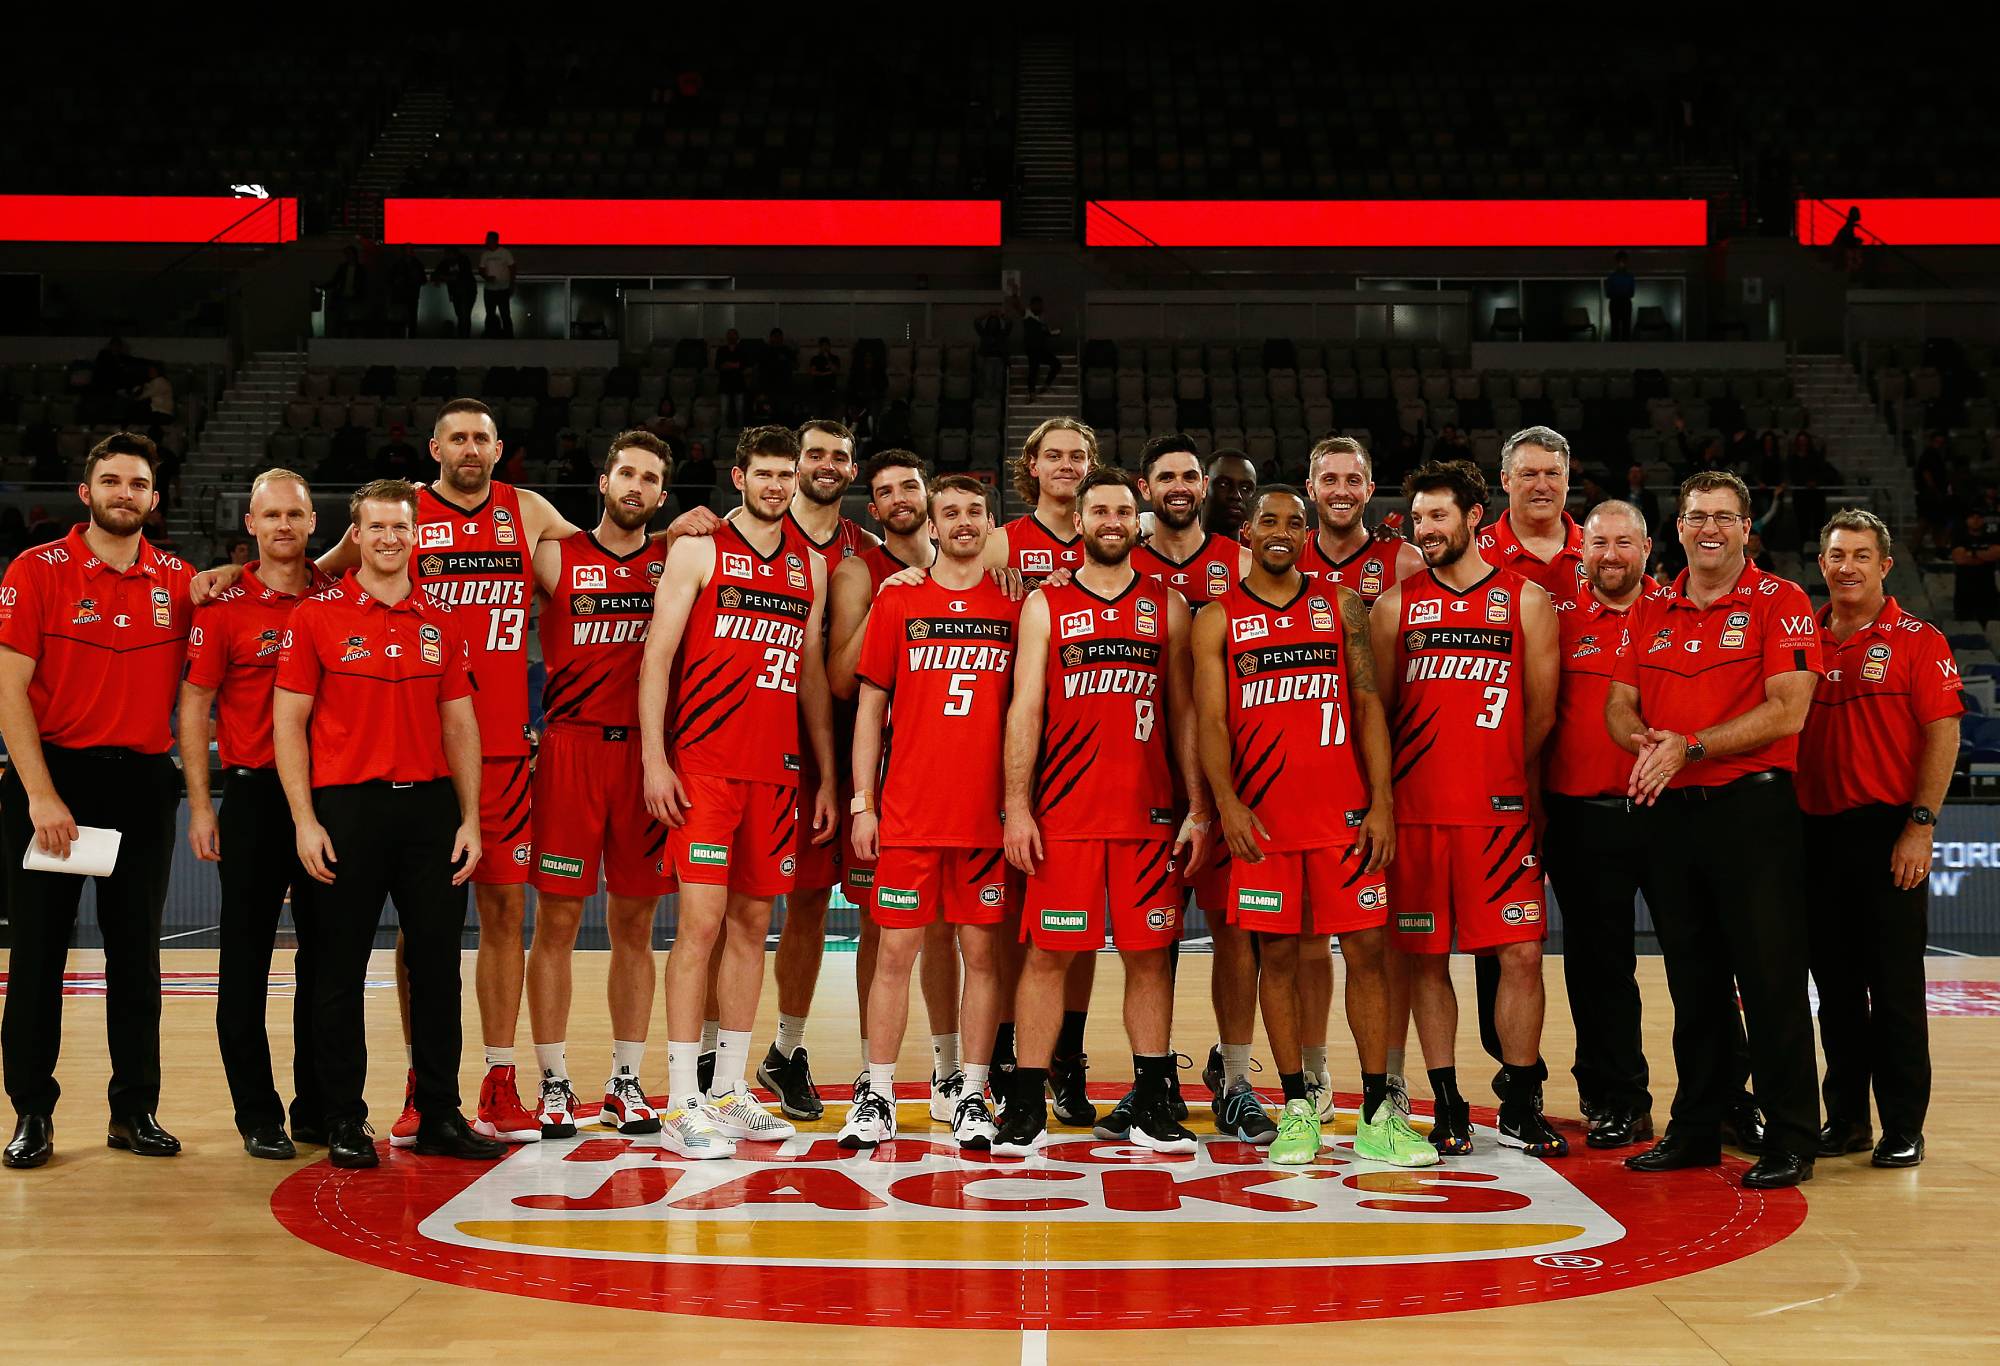 Are the Perth Wildcats the most successful